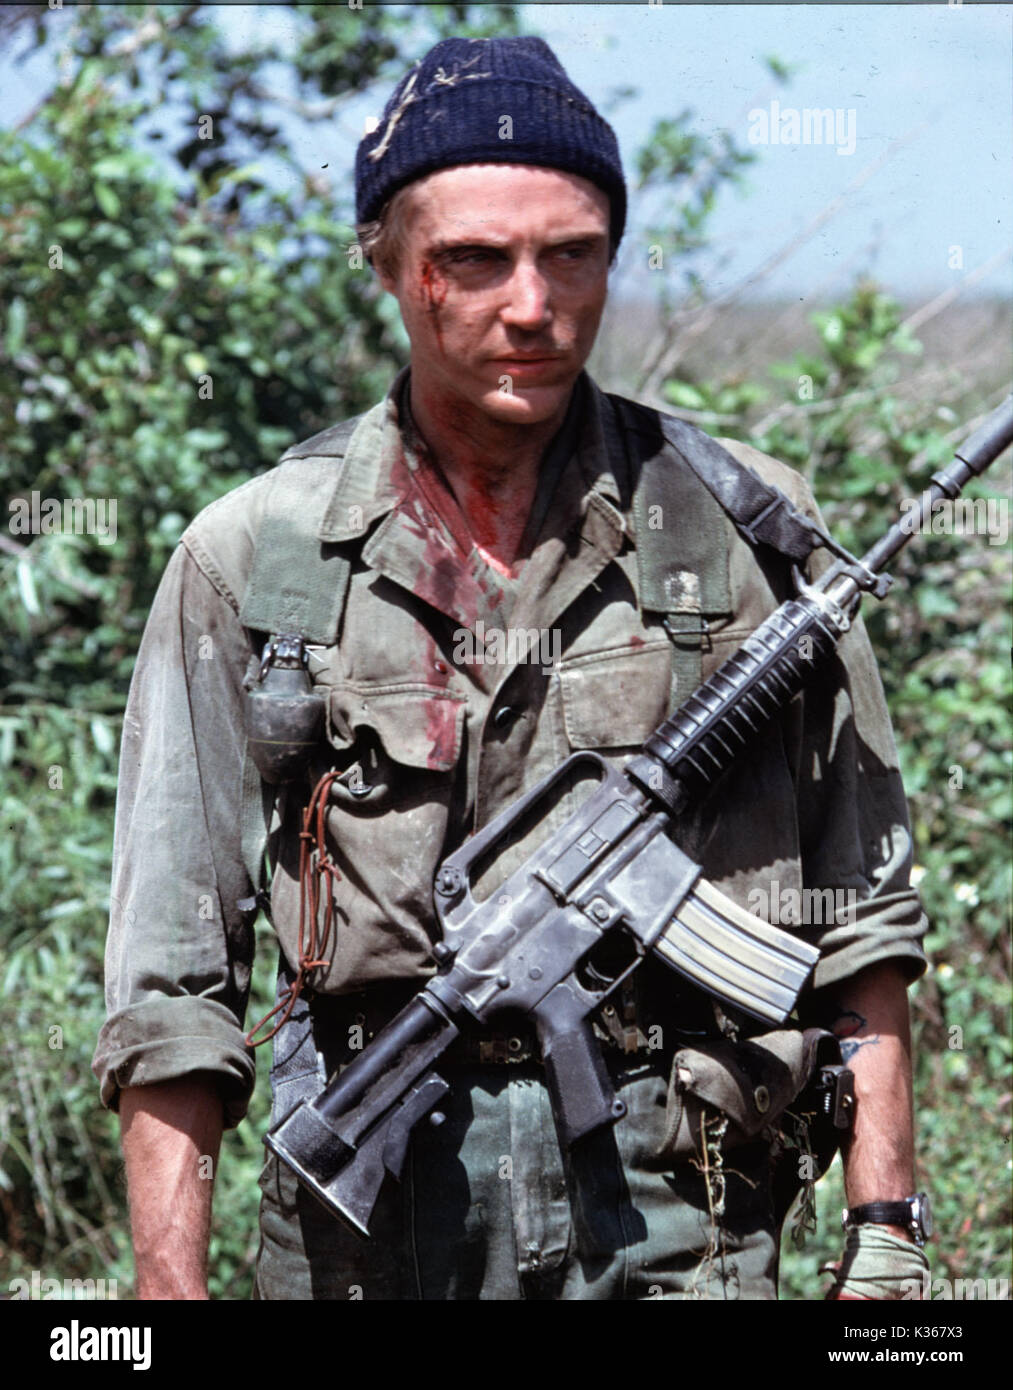 THE DOGS OF WAR CHRISTOPHER WALKEN A UNITED ARTISTS FILM     Date: 1981 Stock Photo